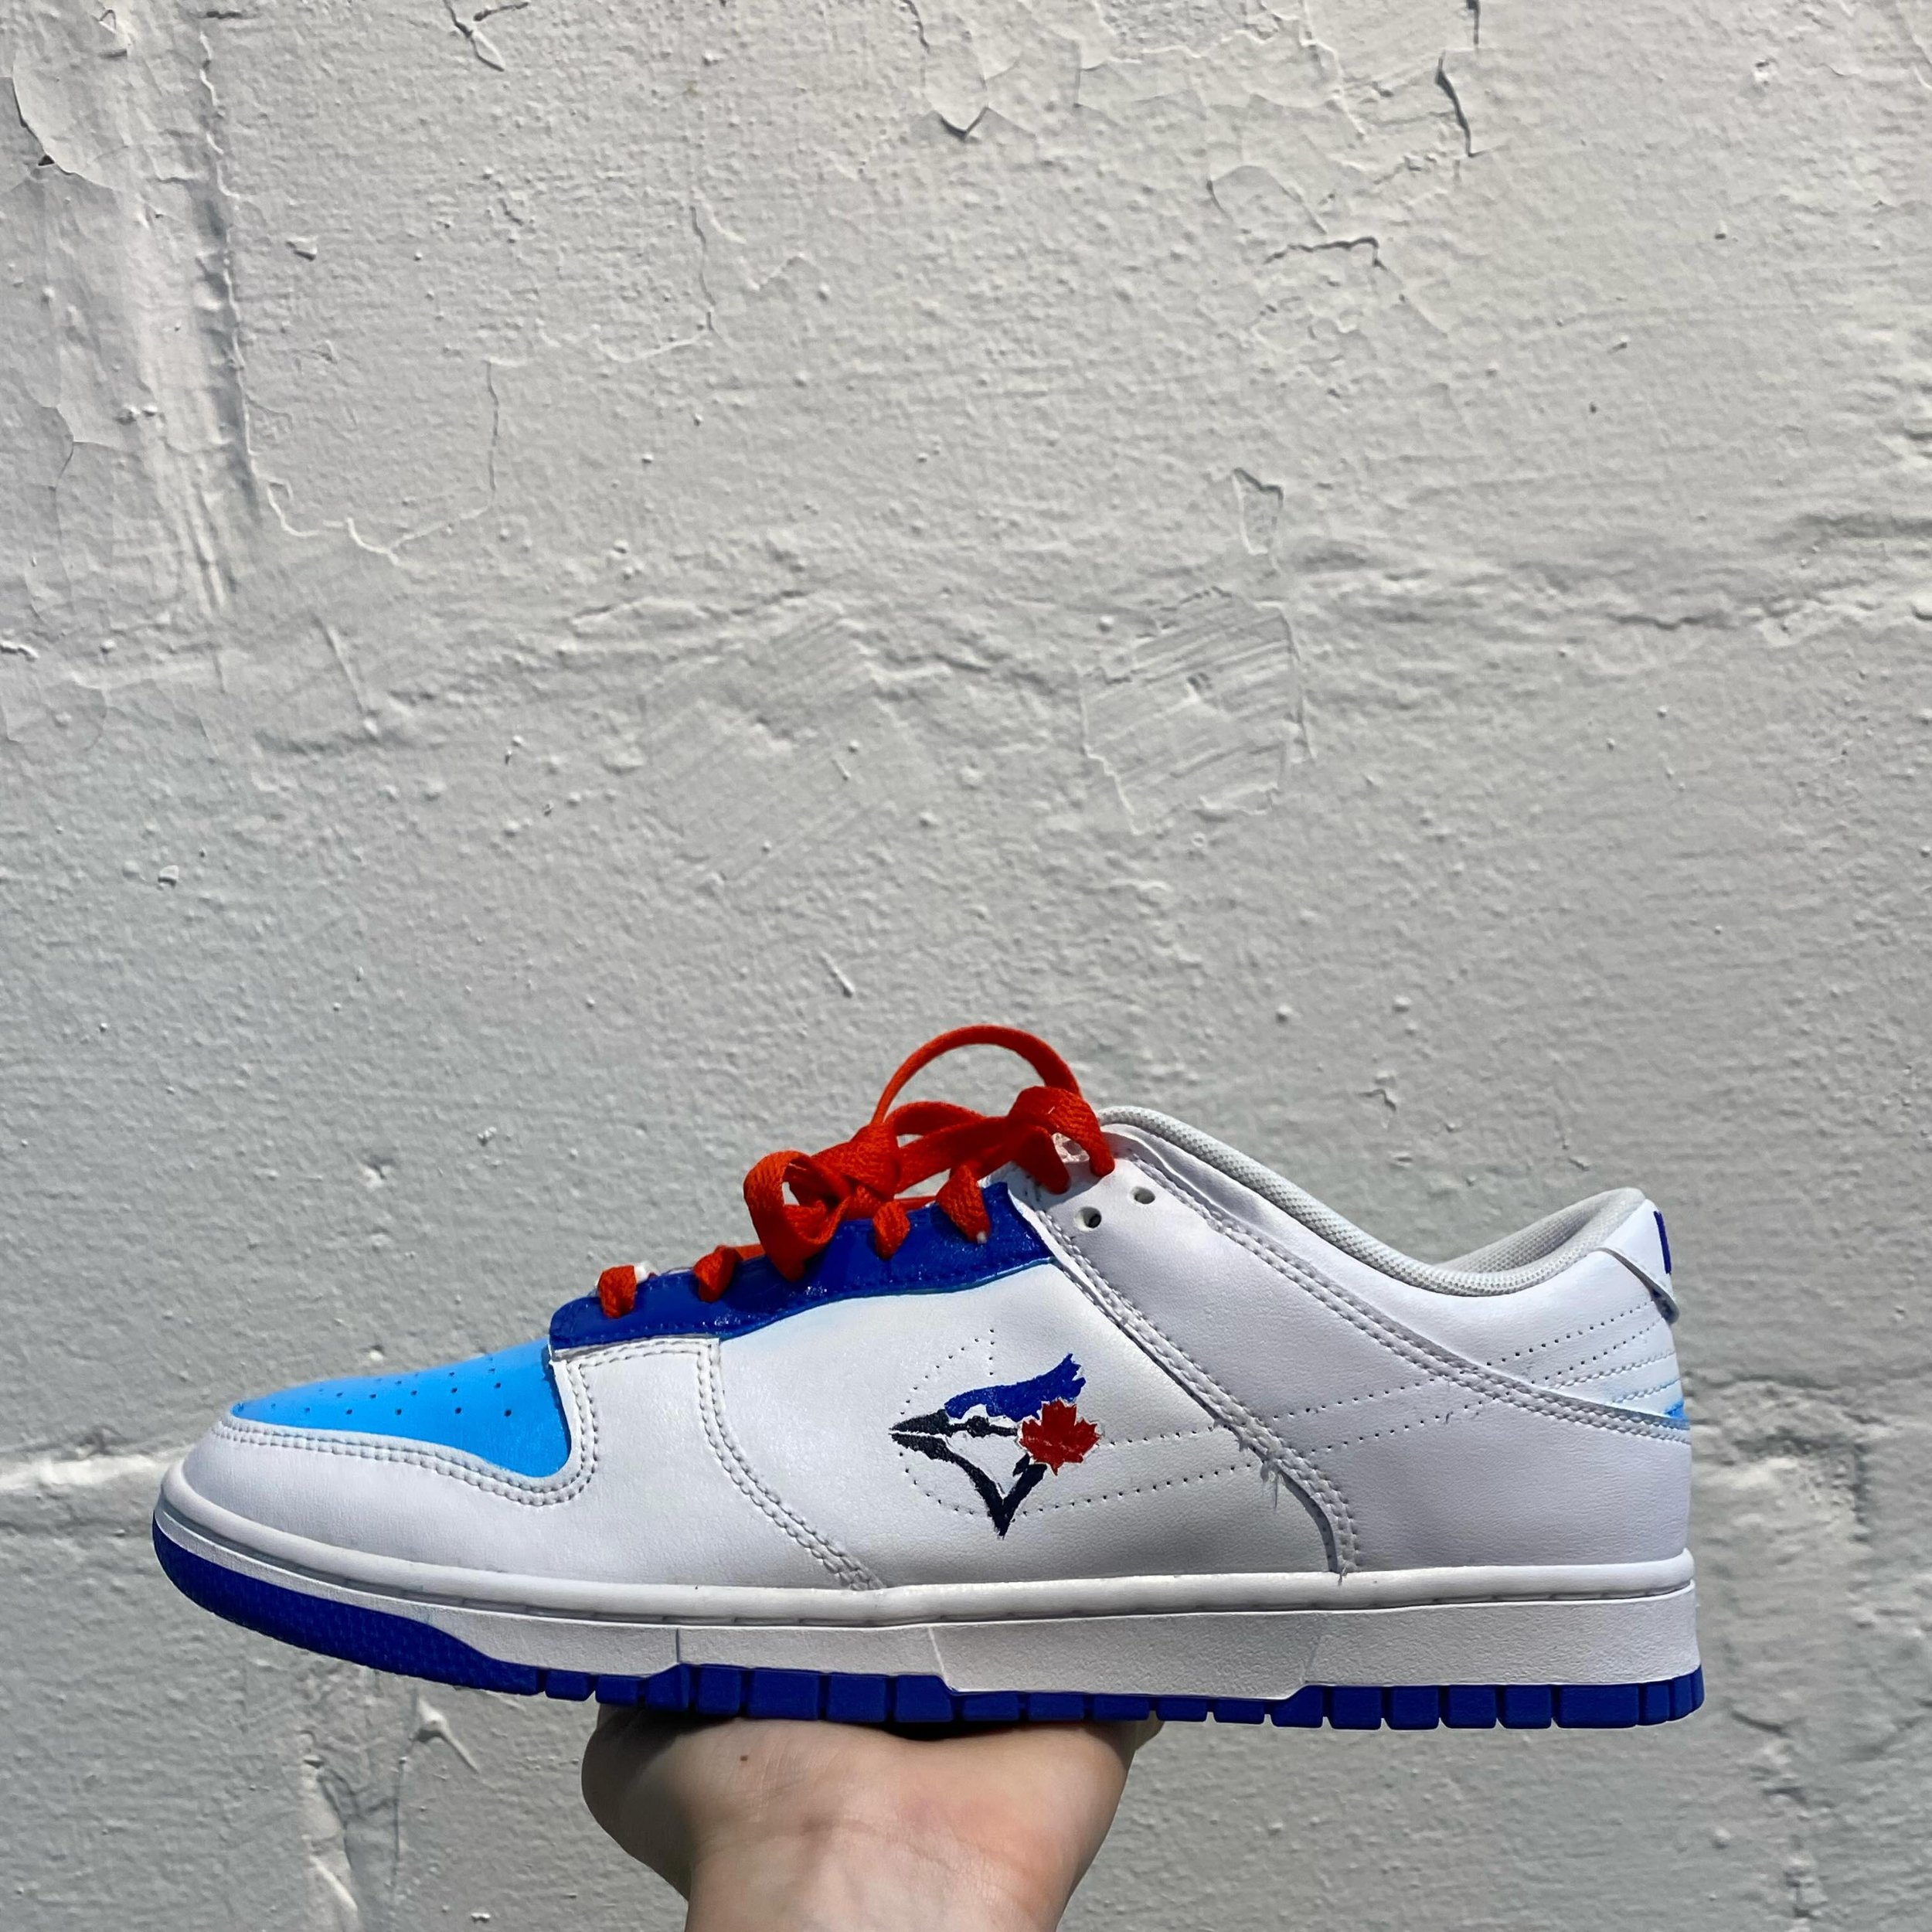 Blue Jays Season is in effect! ⚾️ 

Calling all sports fans, customize your sneakers with your fave sports team inside Mack House. Book your next session at www.mackhouseinc.com